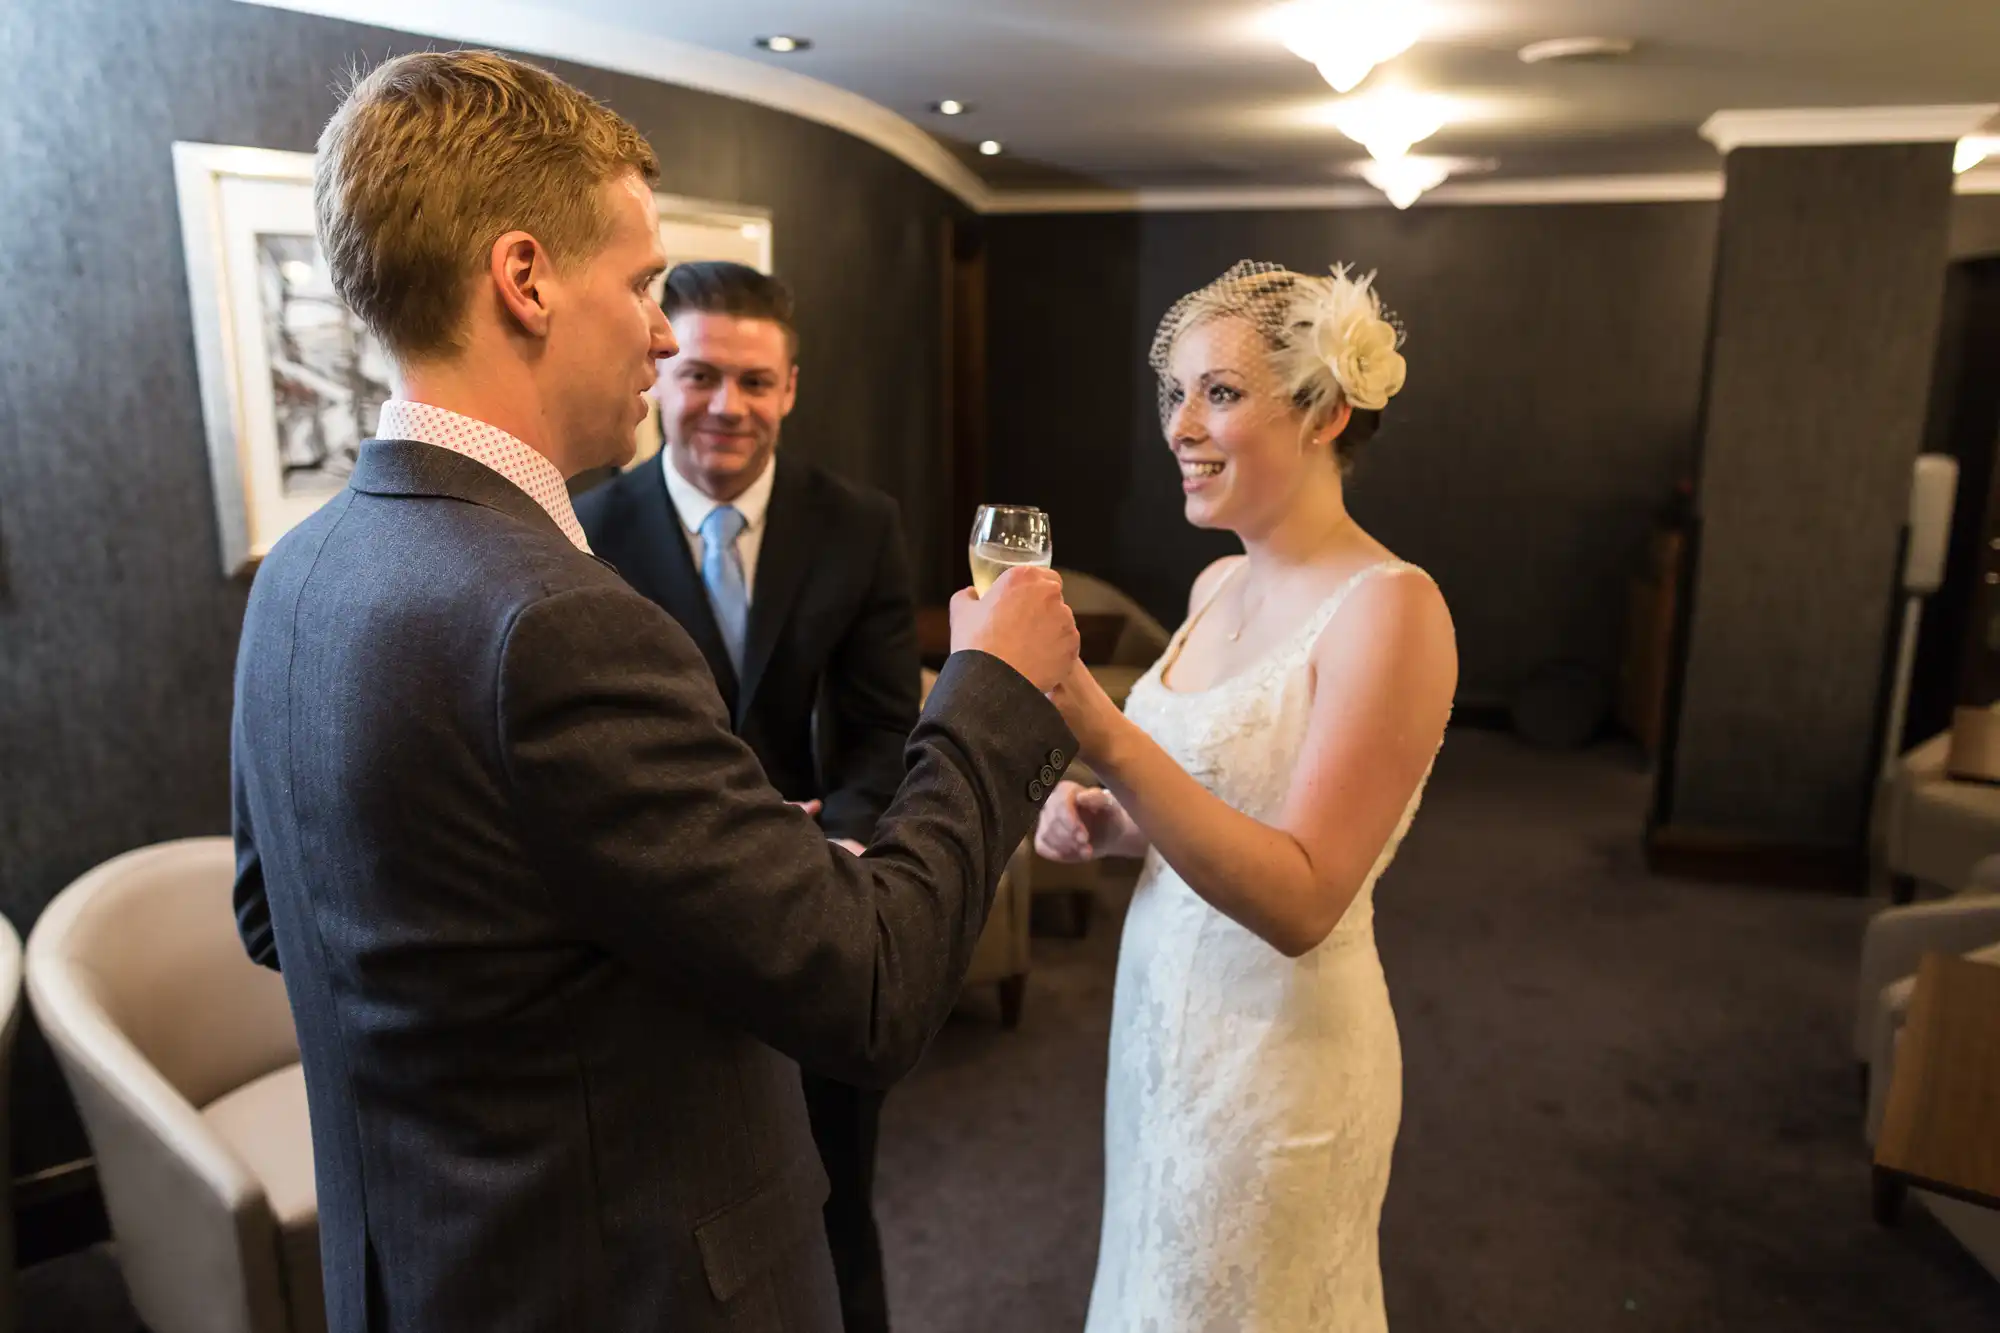 A bride in a white dress with a floral hairpiece and a groom in a suit toast with wine glasses, smiling at each other, with a man observing in the background.